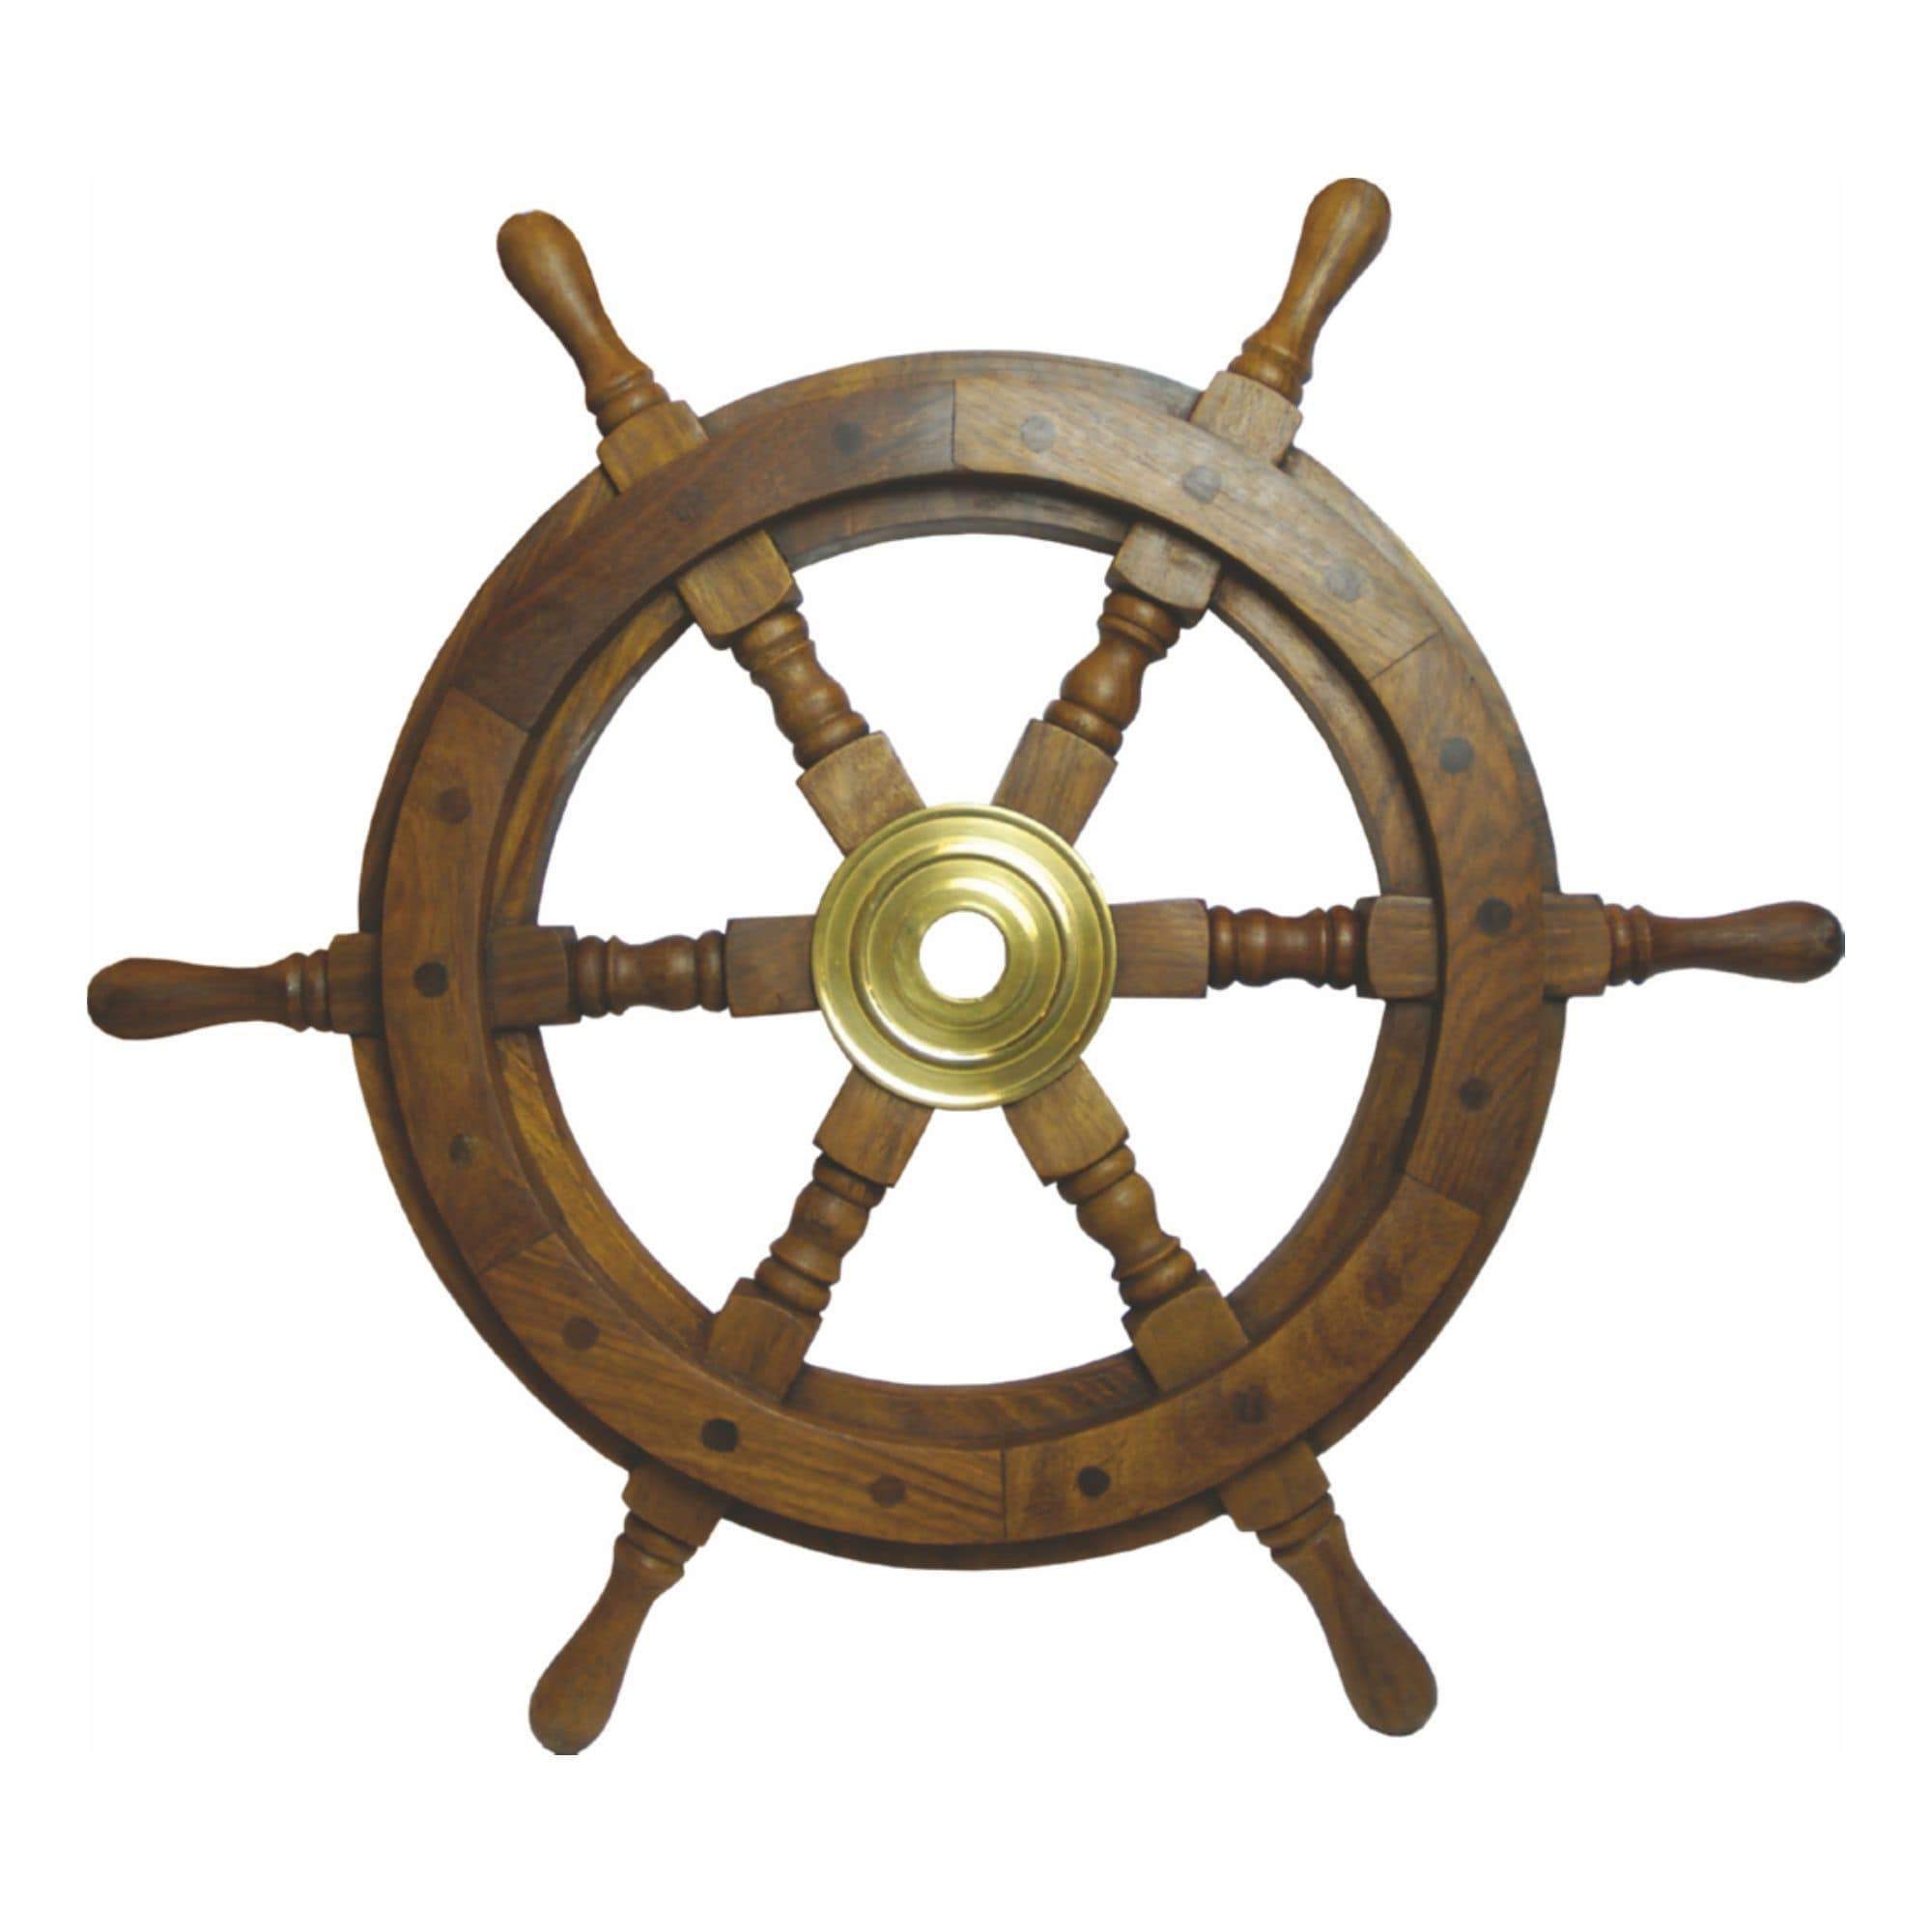 Wooden Ships Wheel – Small